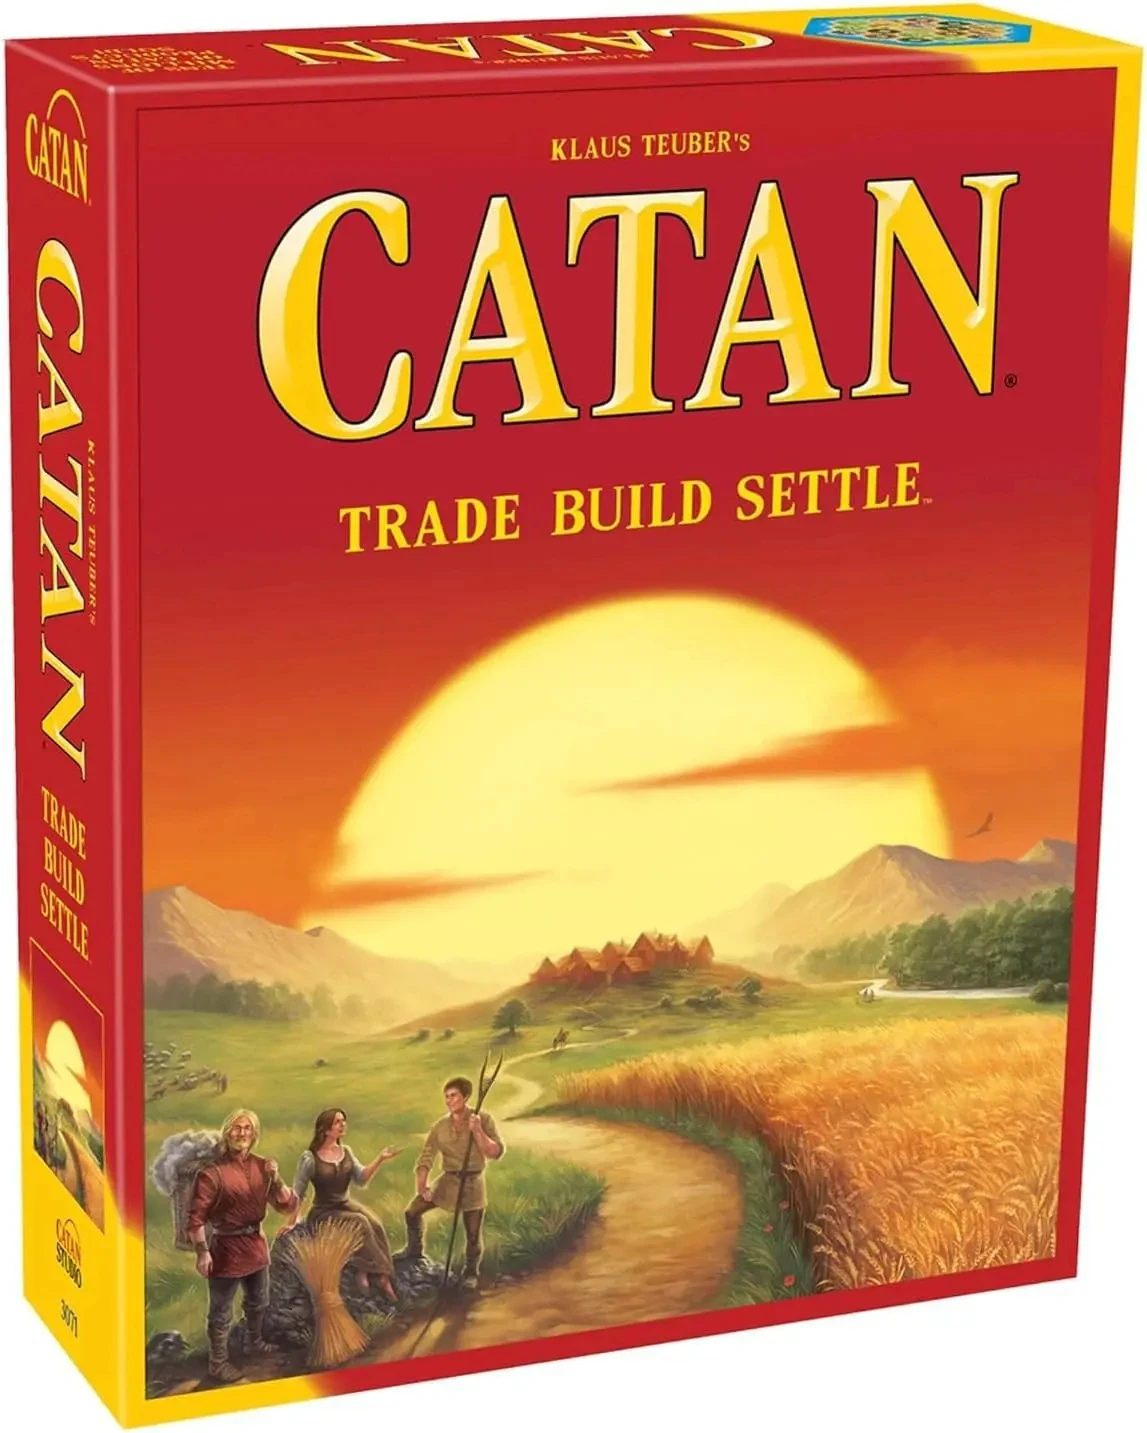 

Catan Studios| Catan | Board Game | Ages 10+ | 3-4 Players | 60 Minutes Playing Time